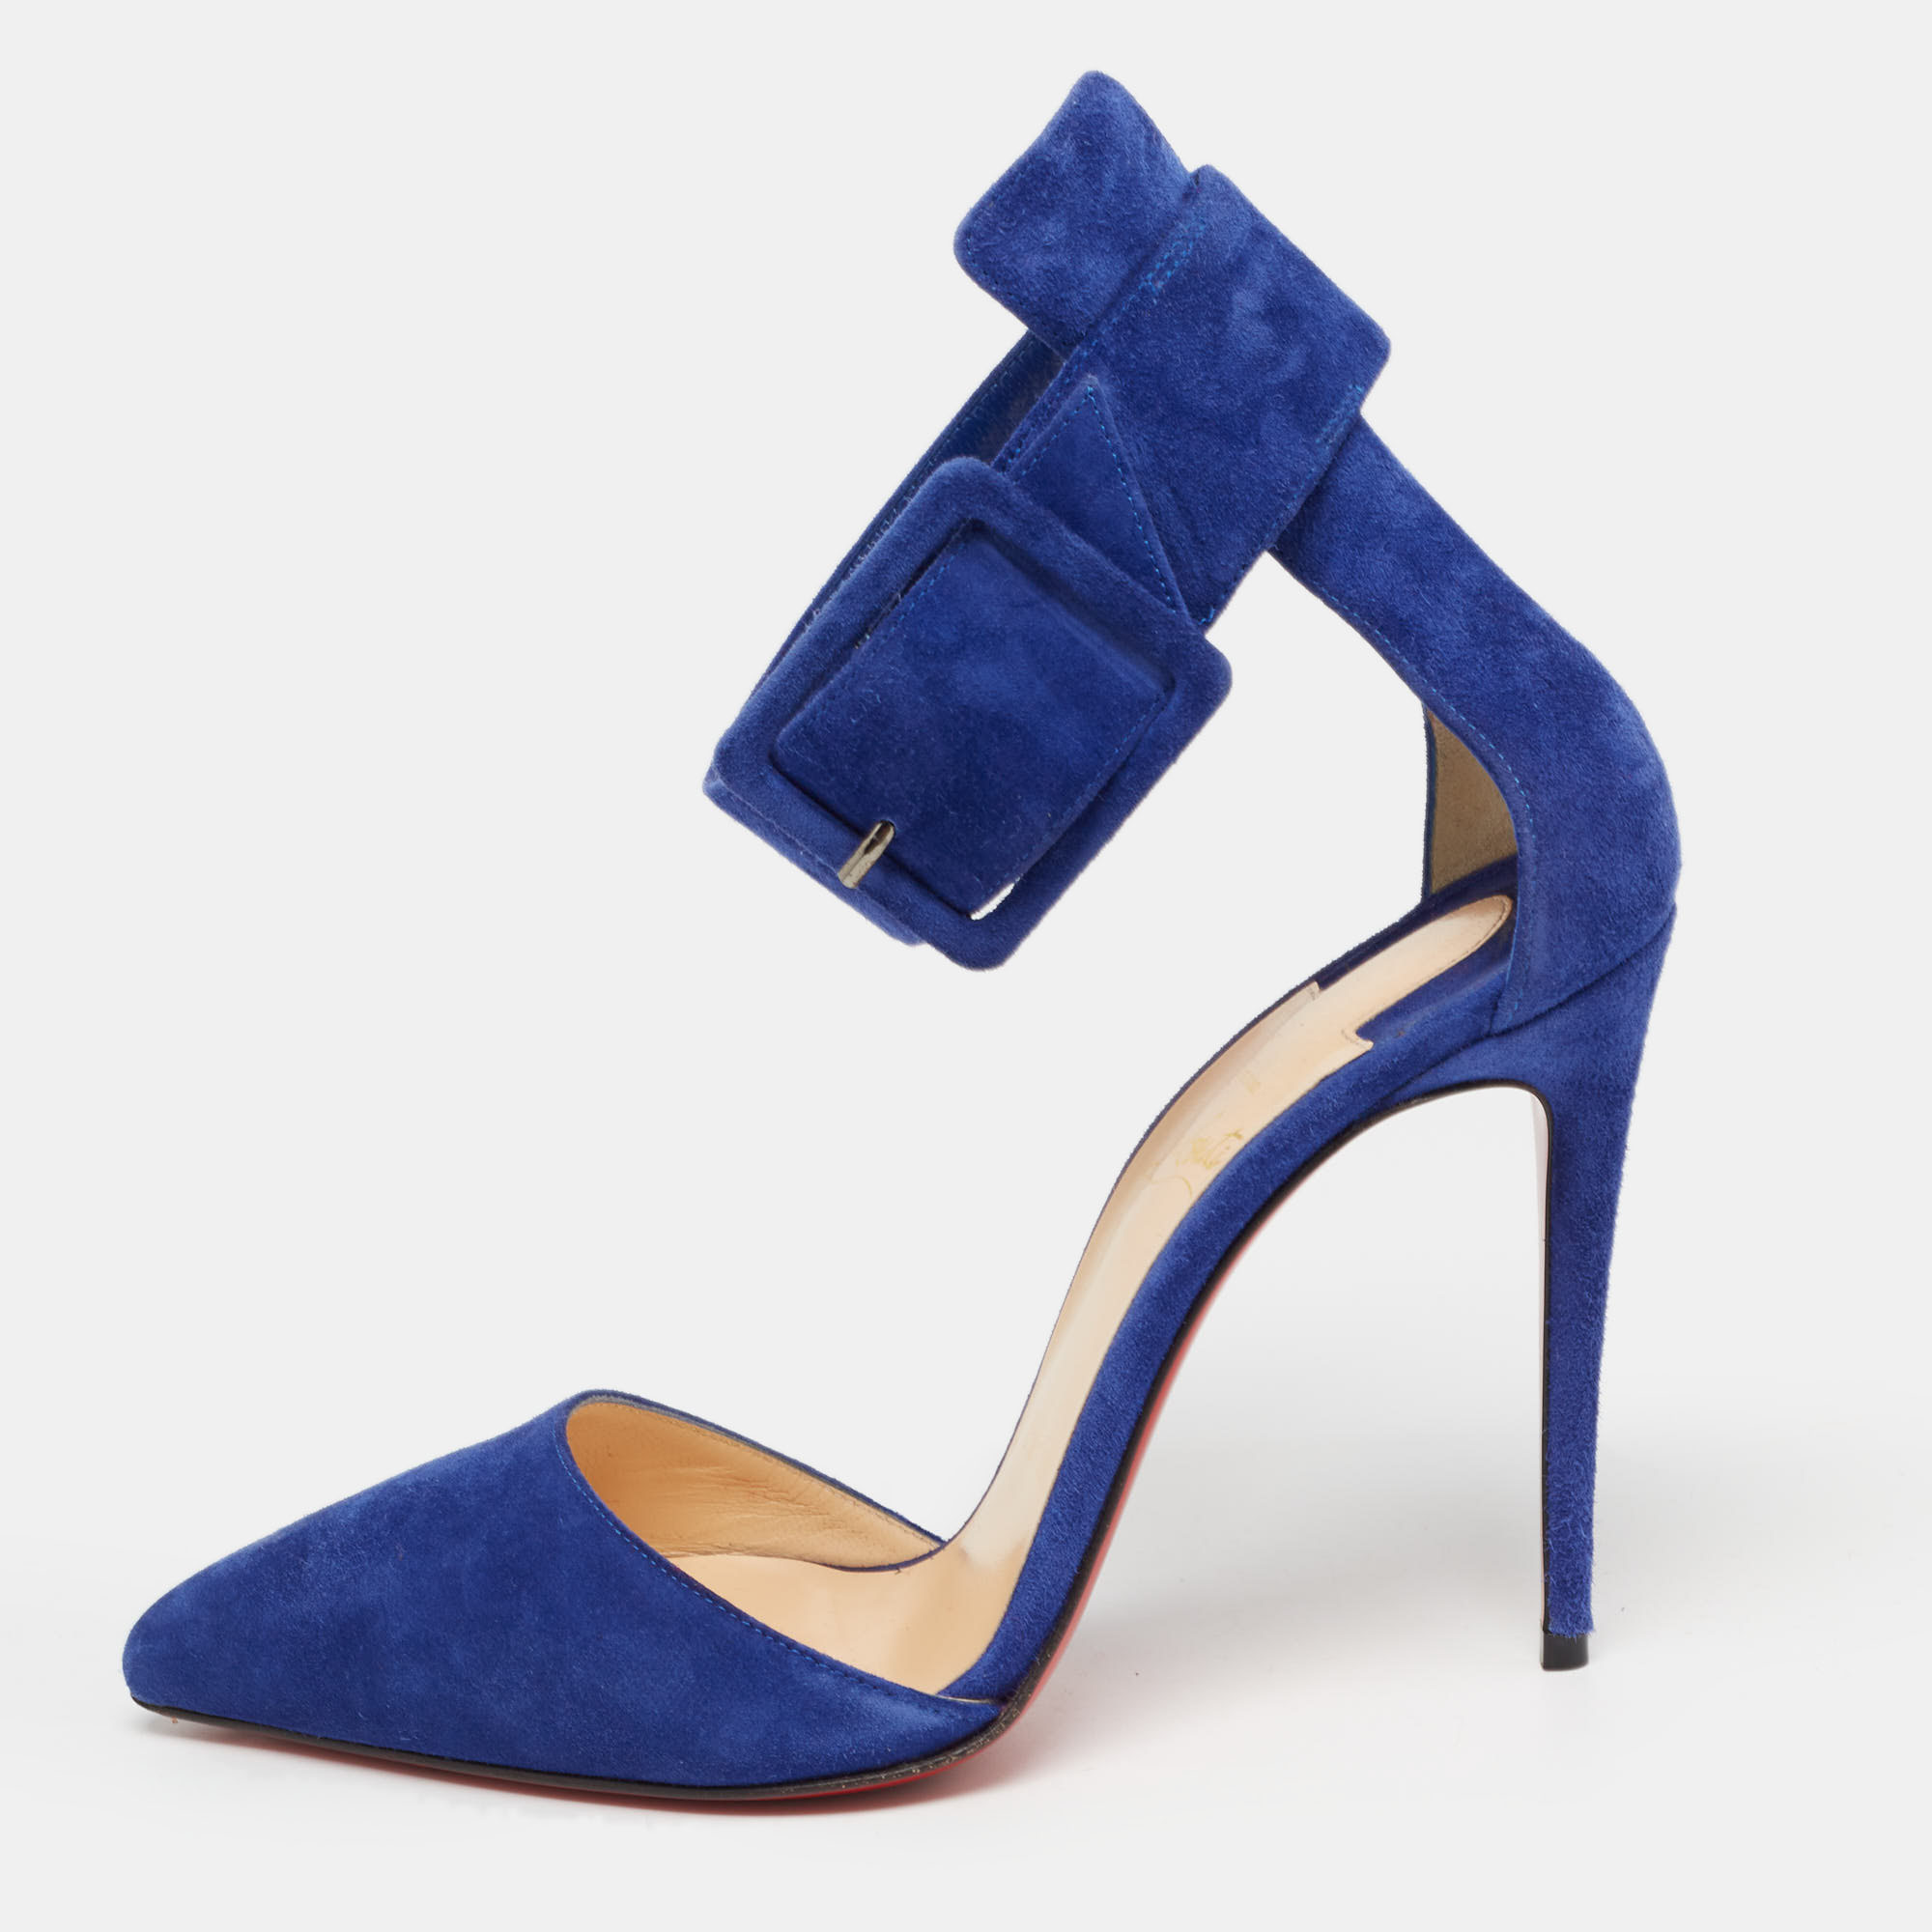 Pre-owned Christian Louboutin Blue Suede Harler Ankle Strap Pumps Size 37.5